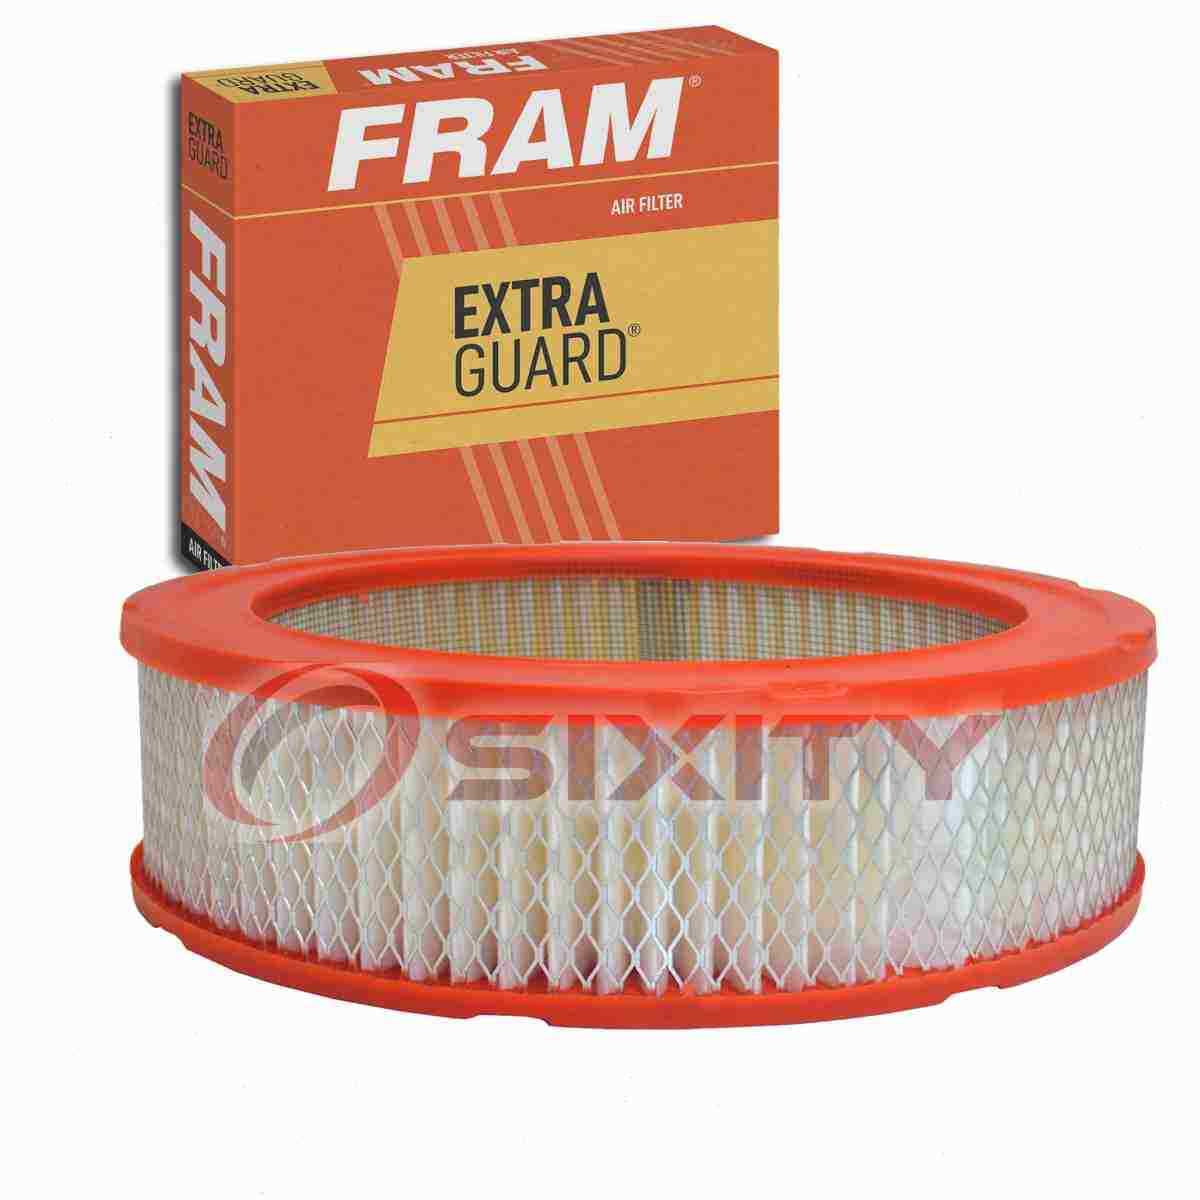 FRAM Extra Guard Air Filter for 1960-1961 Dodge Phoenix Intake Inlet gg